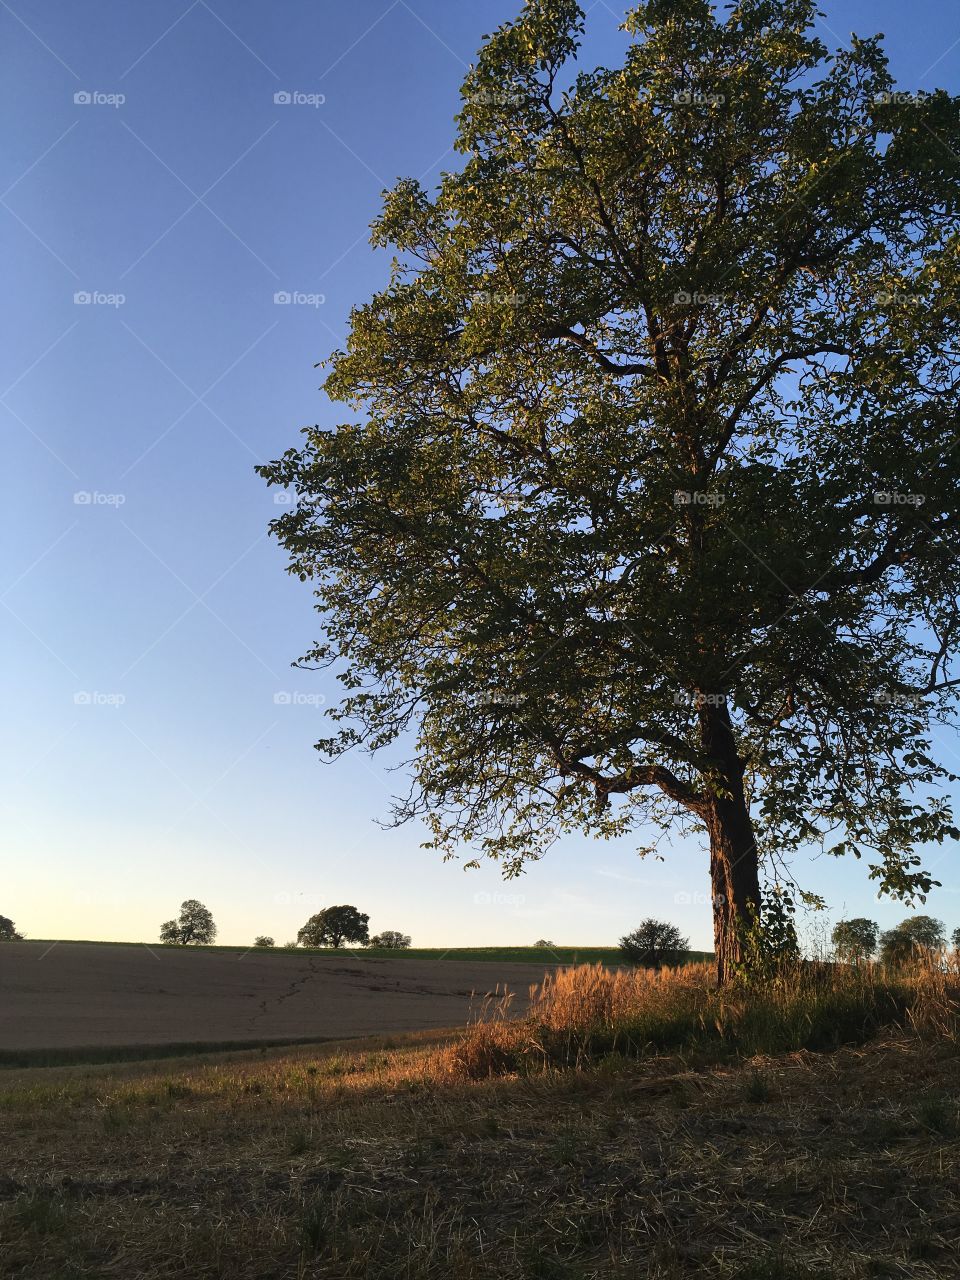 Sycamore tree in field at sunset